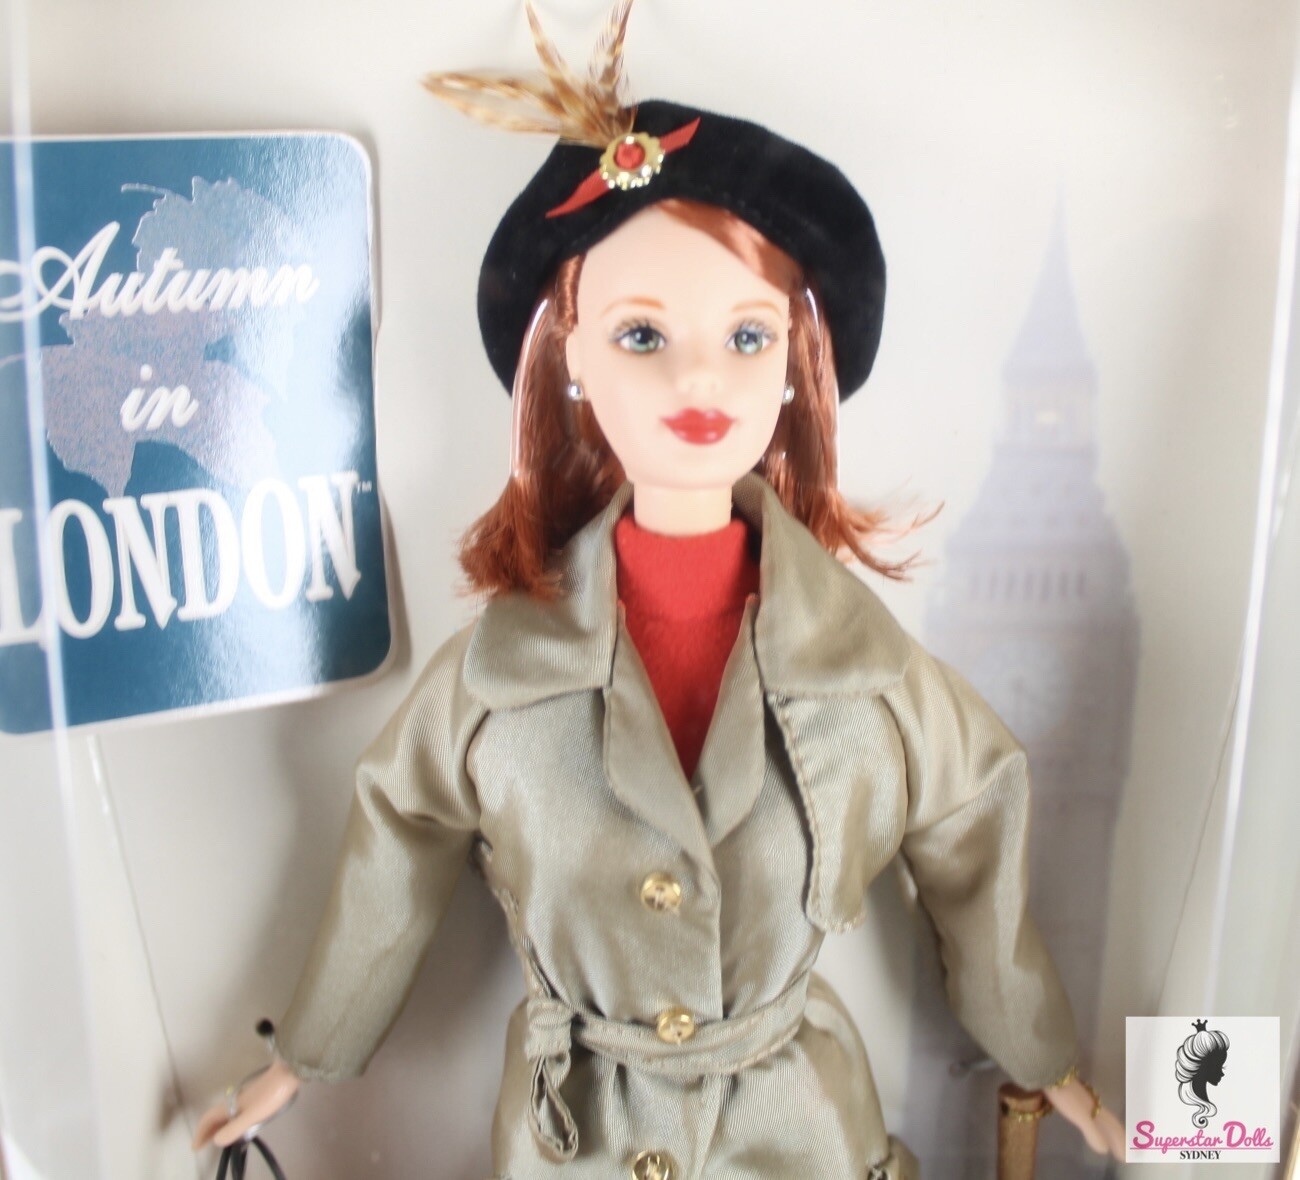 1999 Collector Edition: &quot;Autumn in London&quot; Barbie Doll from the City Seasons Collection